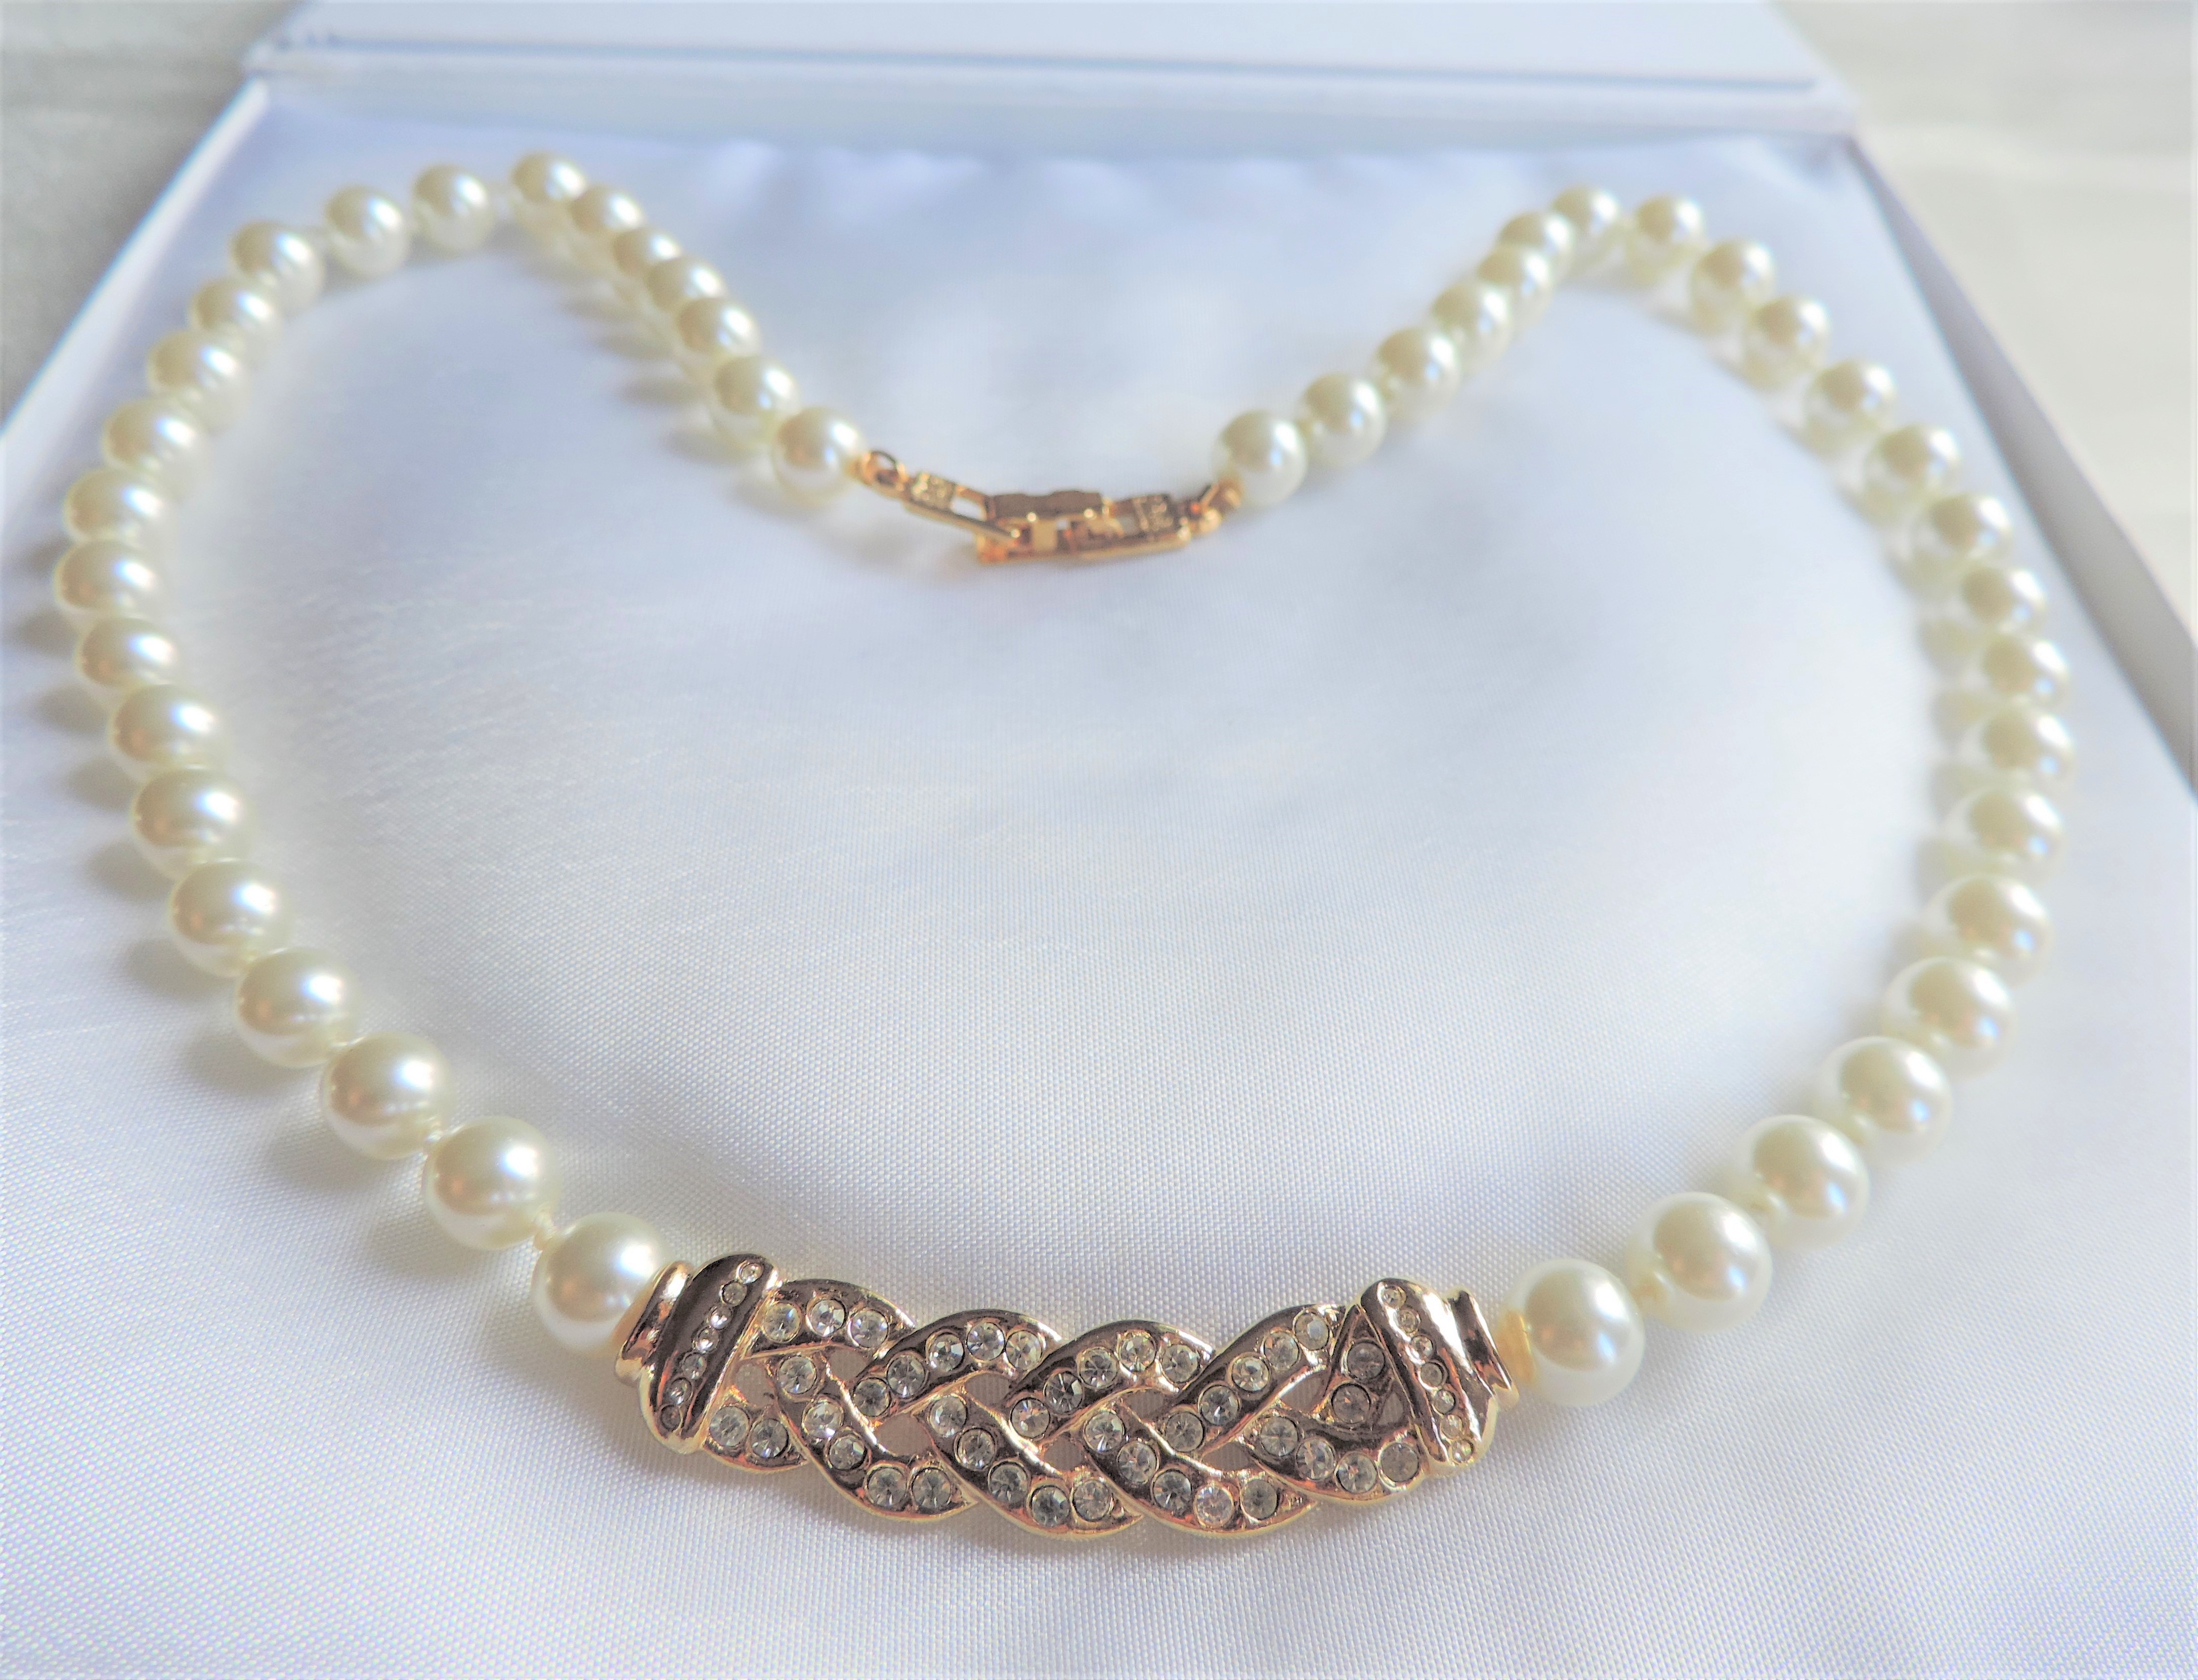 20 inch Single Strand Pearl & Crystal Necklace with Gift Pouch - Image 2 of 4